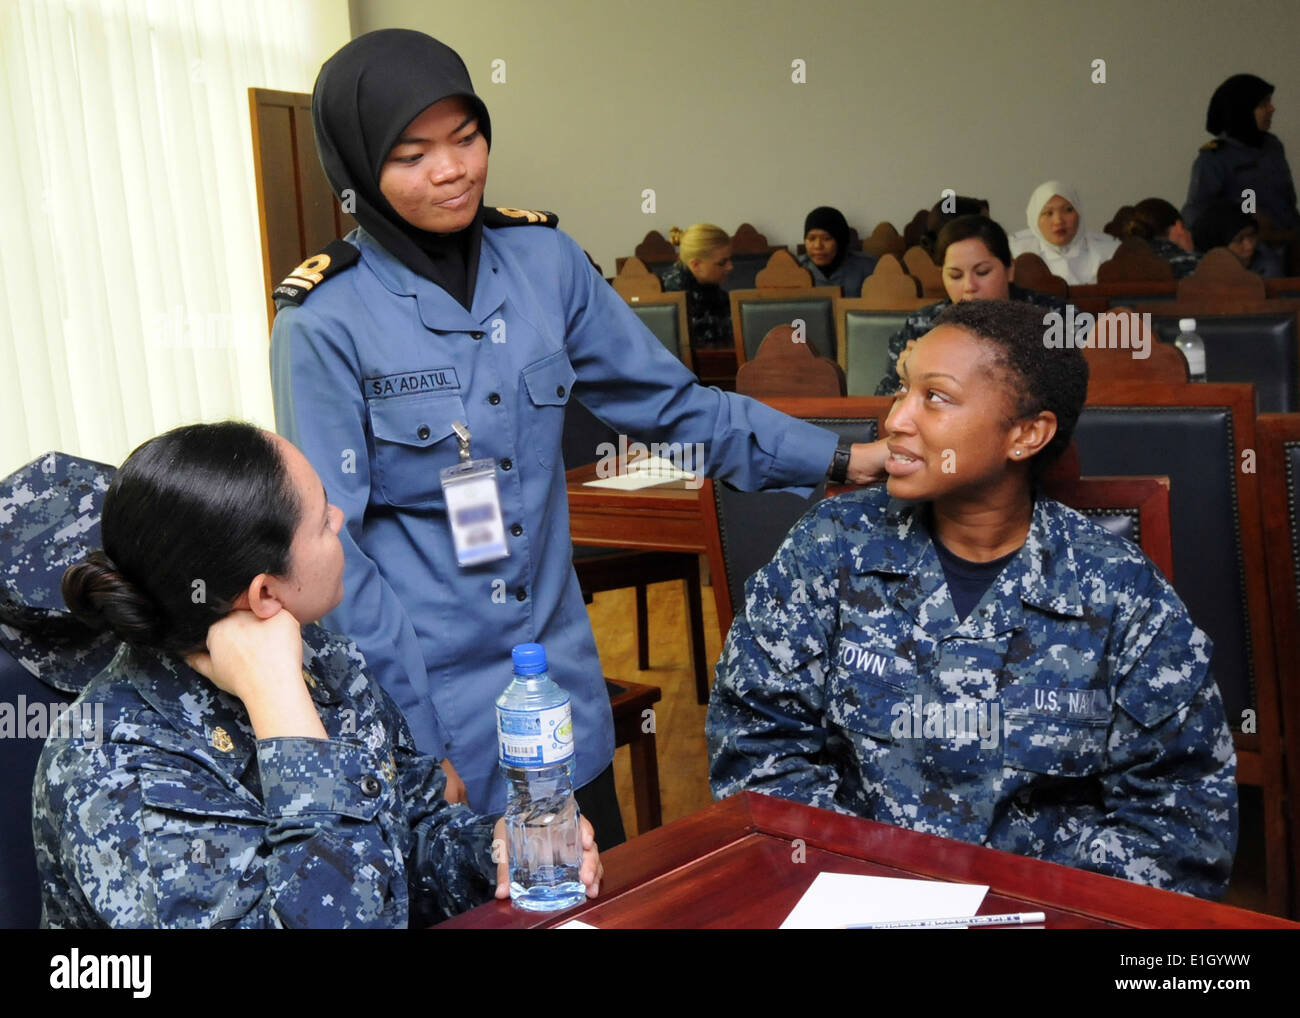 U.S. Navy Chief Fire Controlman Sandra Valdez, left, and Fire Controlman Tanysha Brown, both assigned to the guided missile des Stock Photo